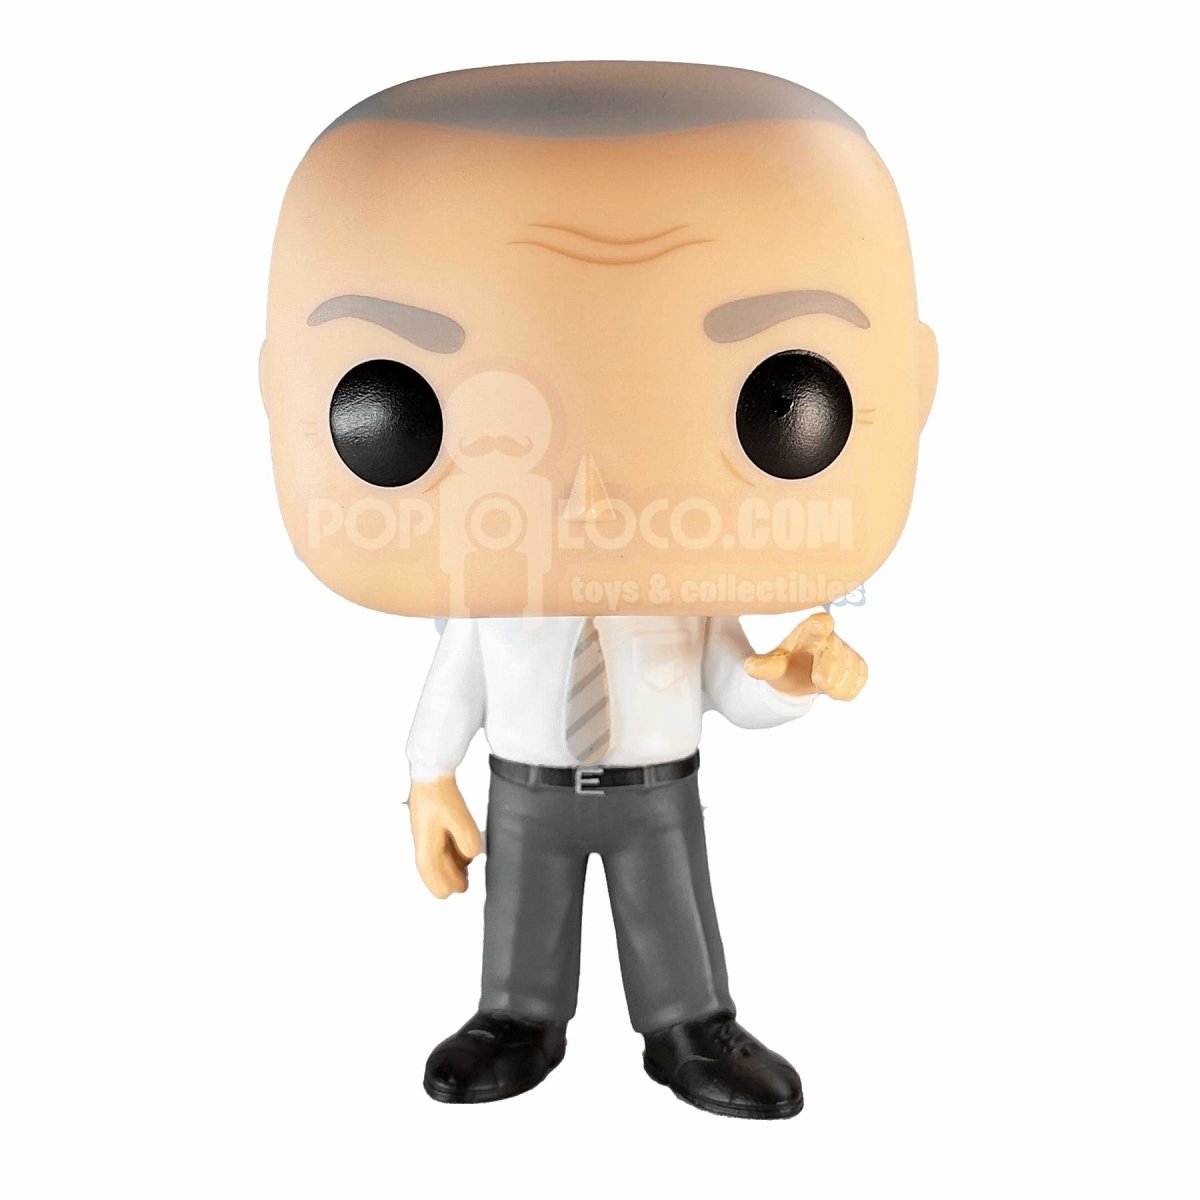 Funko POP! Television The Office - Creed Bratton Specialty Series Pop-O-Loco